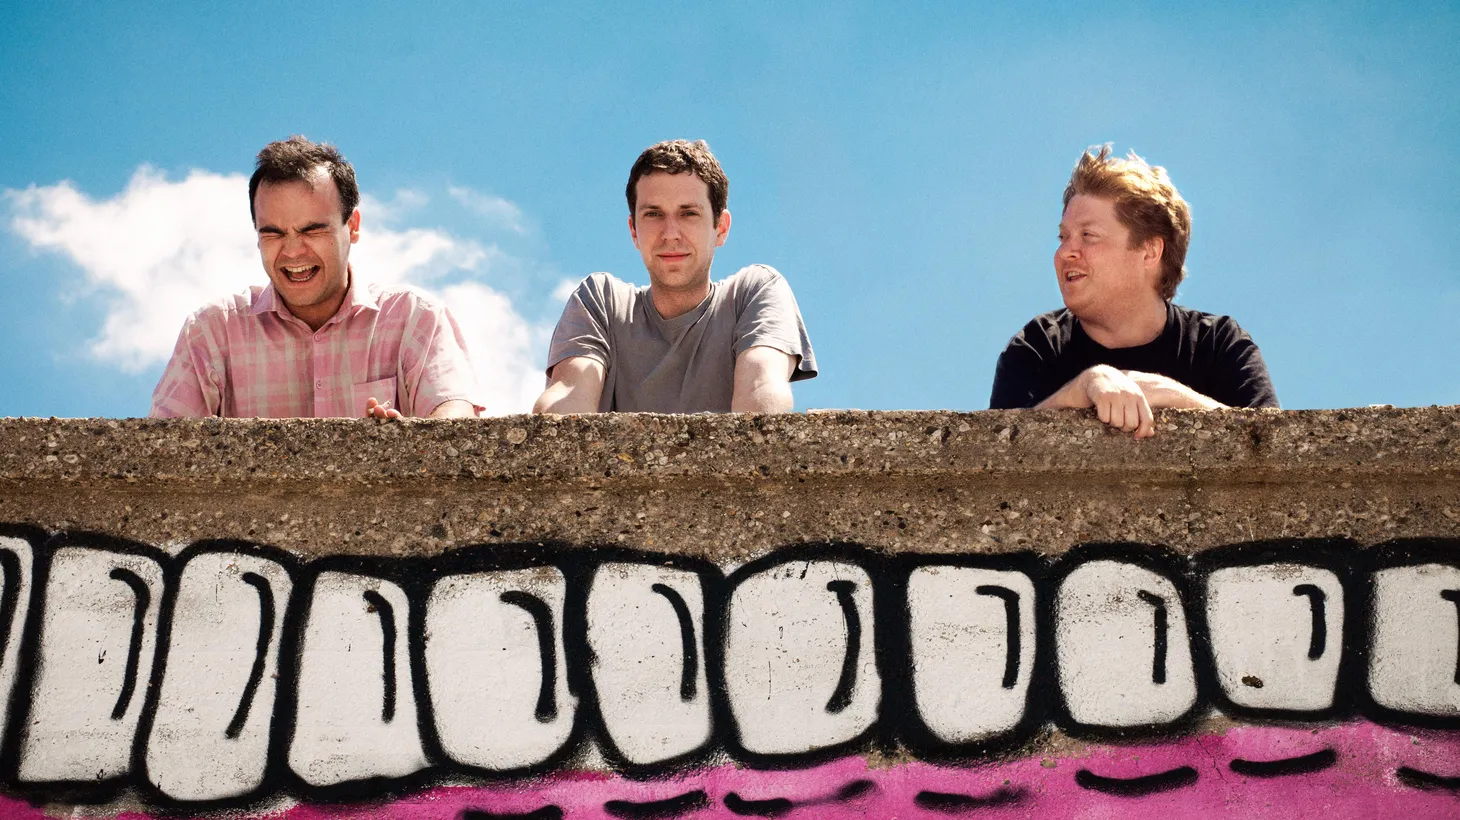 Future Islands tug at your heart with synth-pop driven songs featuring swelling melodies and lyrics about love and loss....